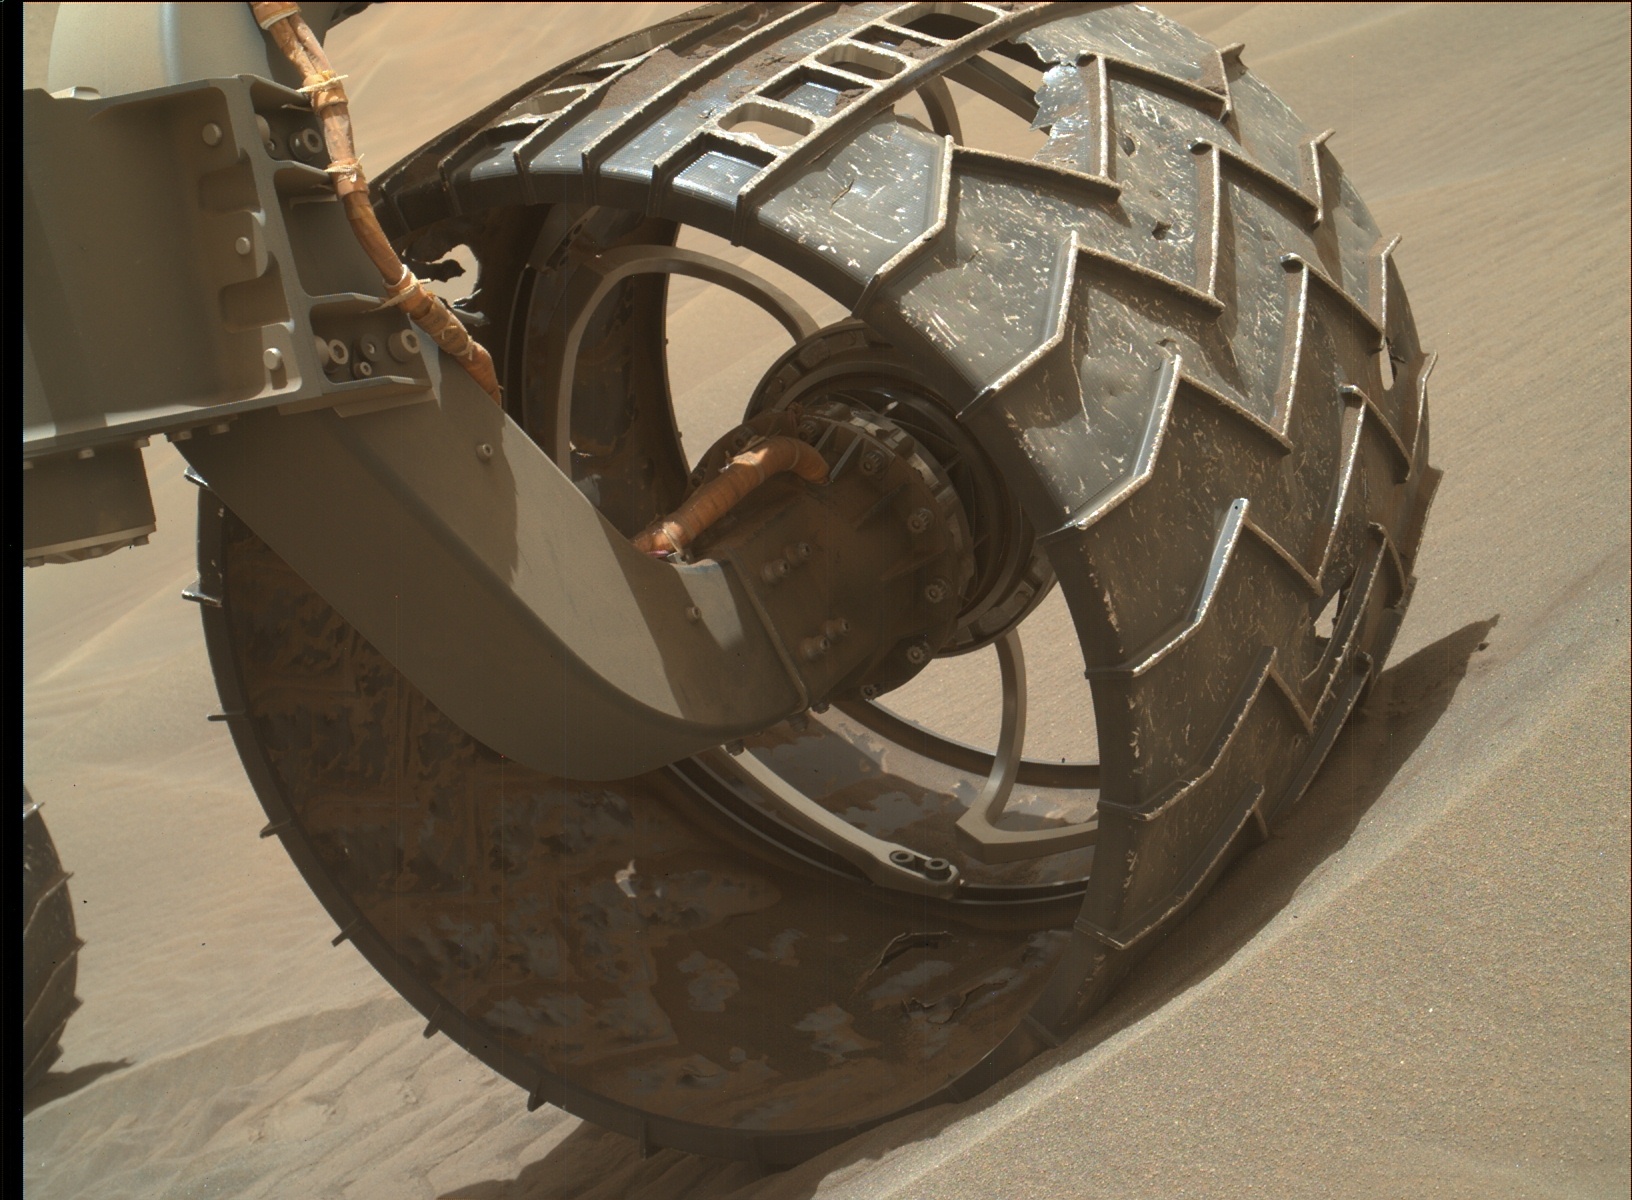 Nasa's Mars rover Curiosity acquired this image using its Mars Hand Lens Imager (MAHLI) on Sol 958